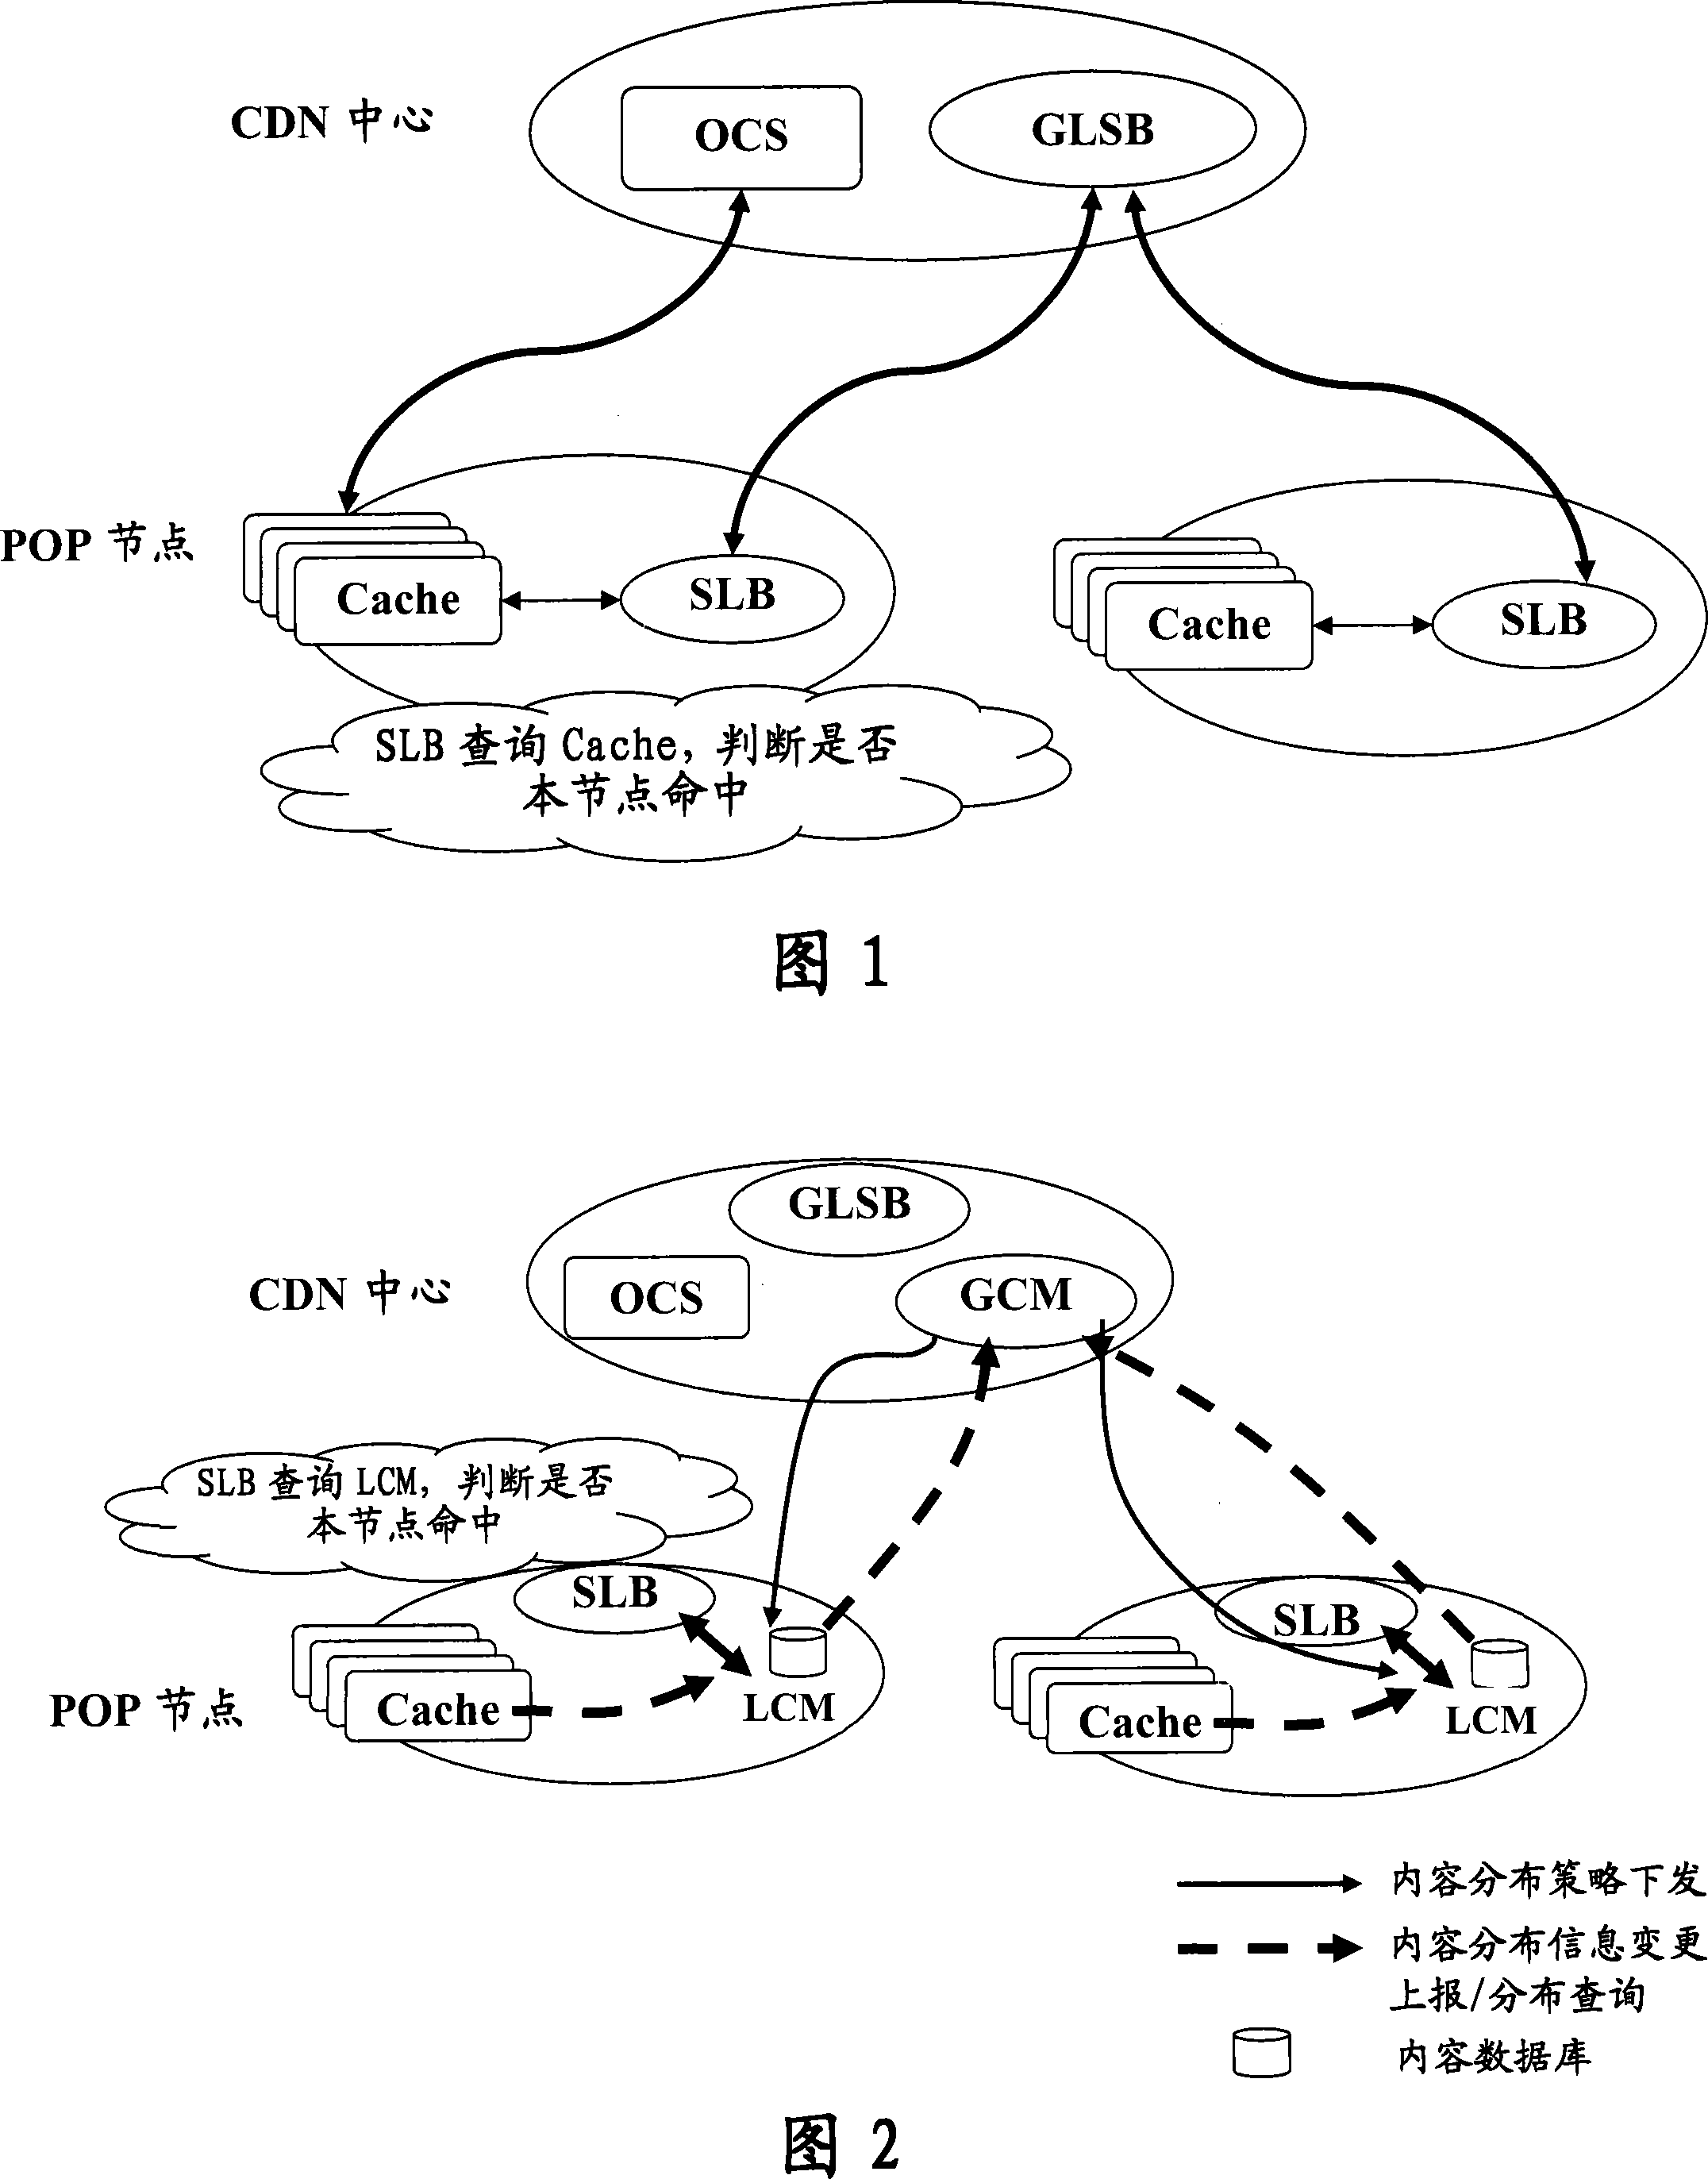 Content distribution network and scheduling method based on content in the network